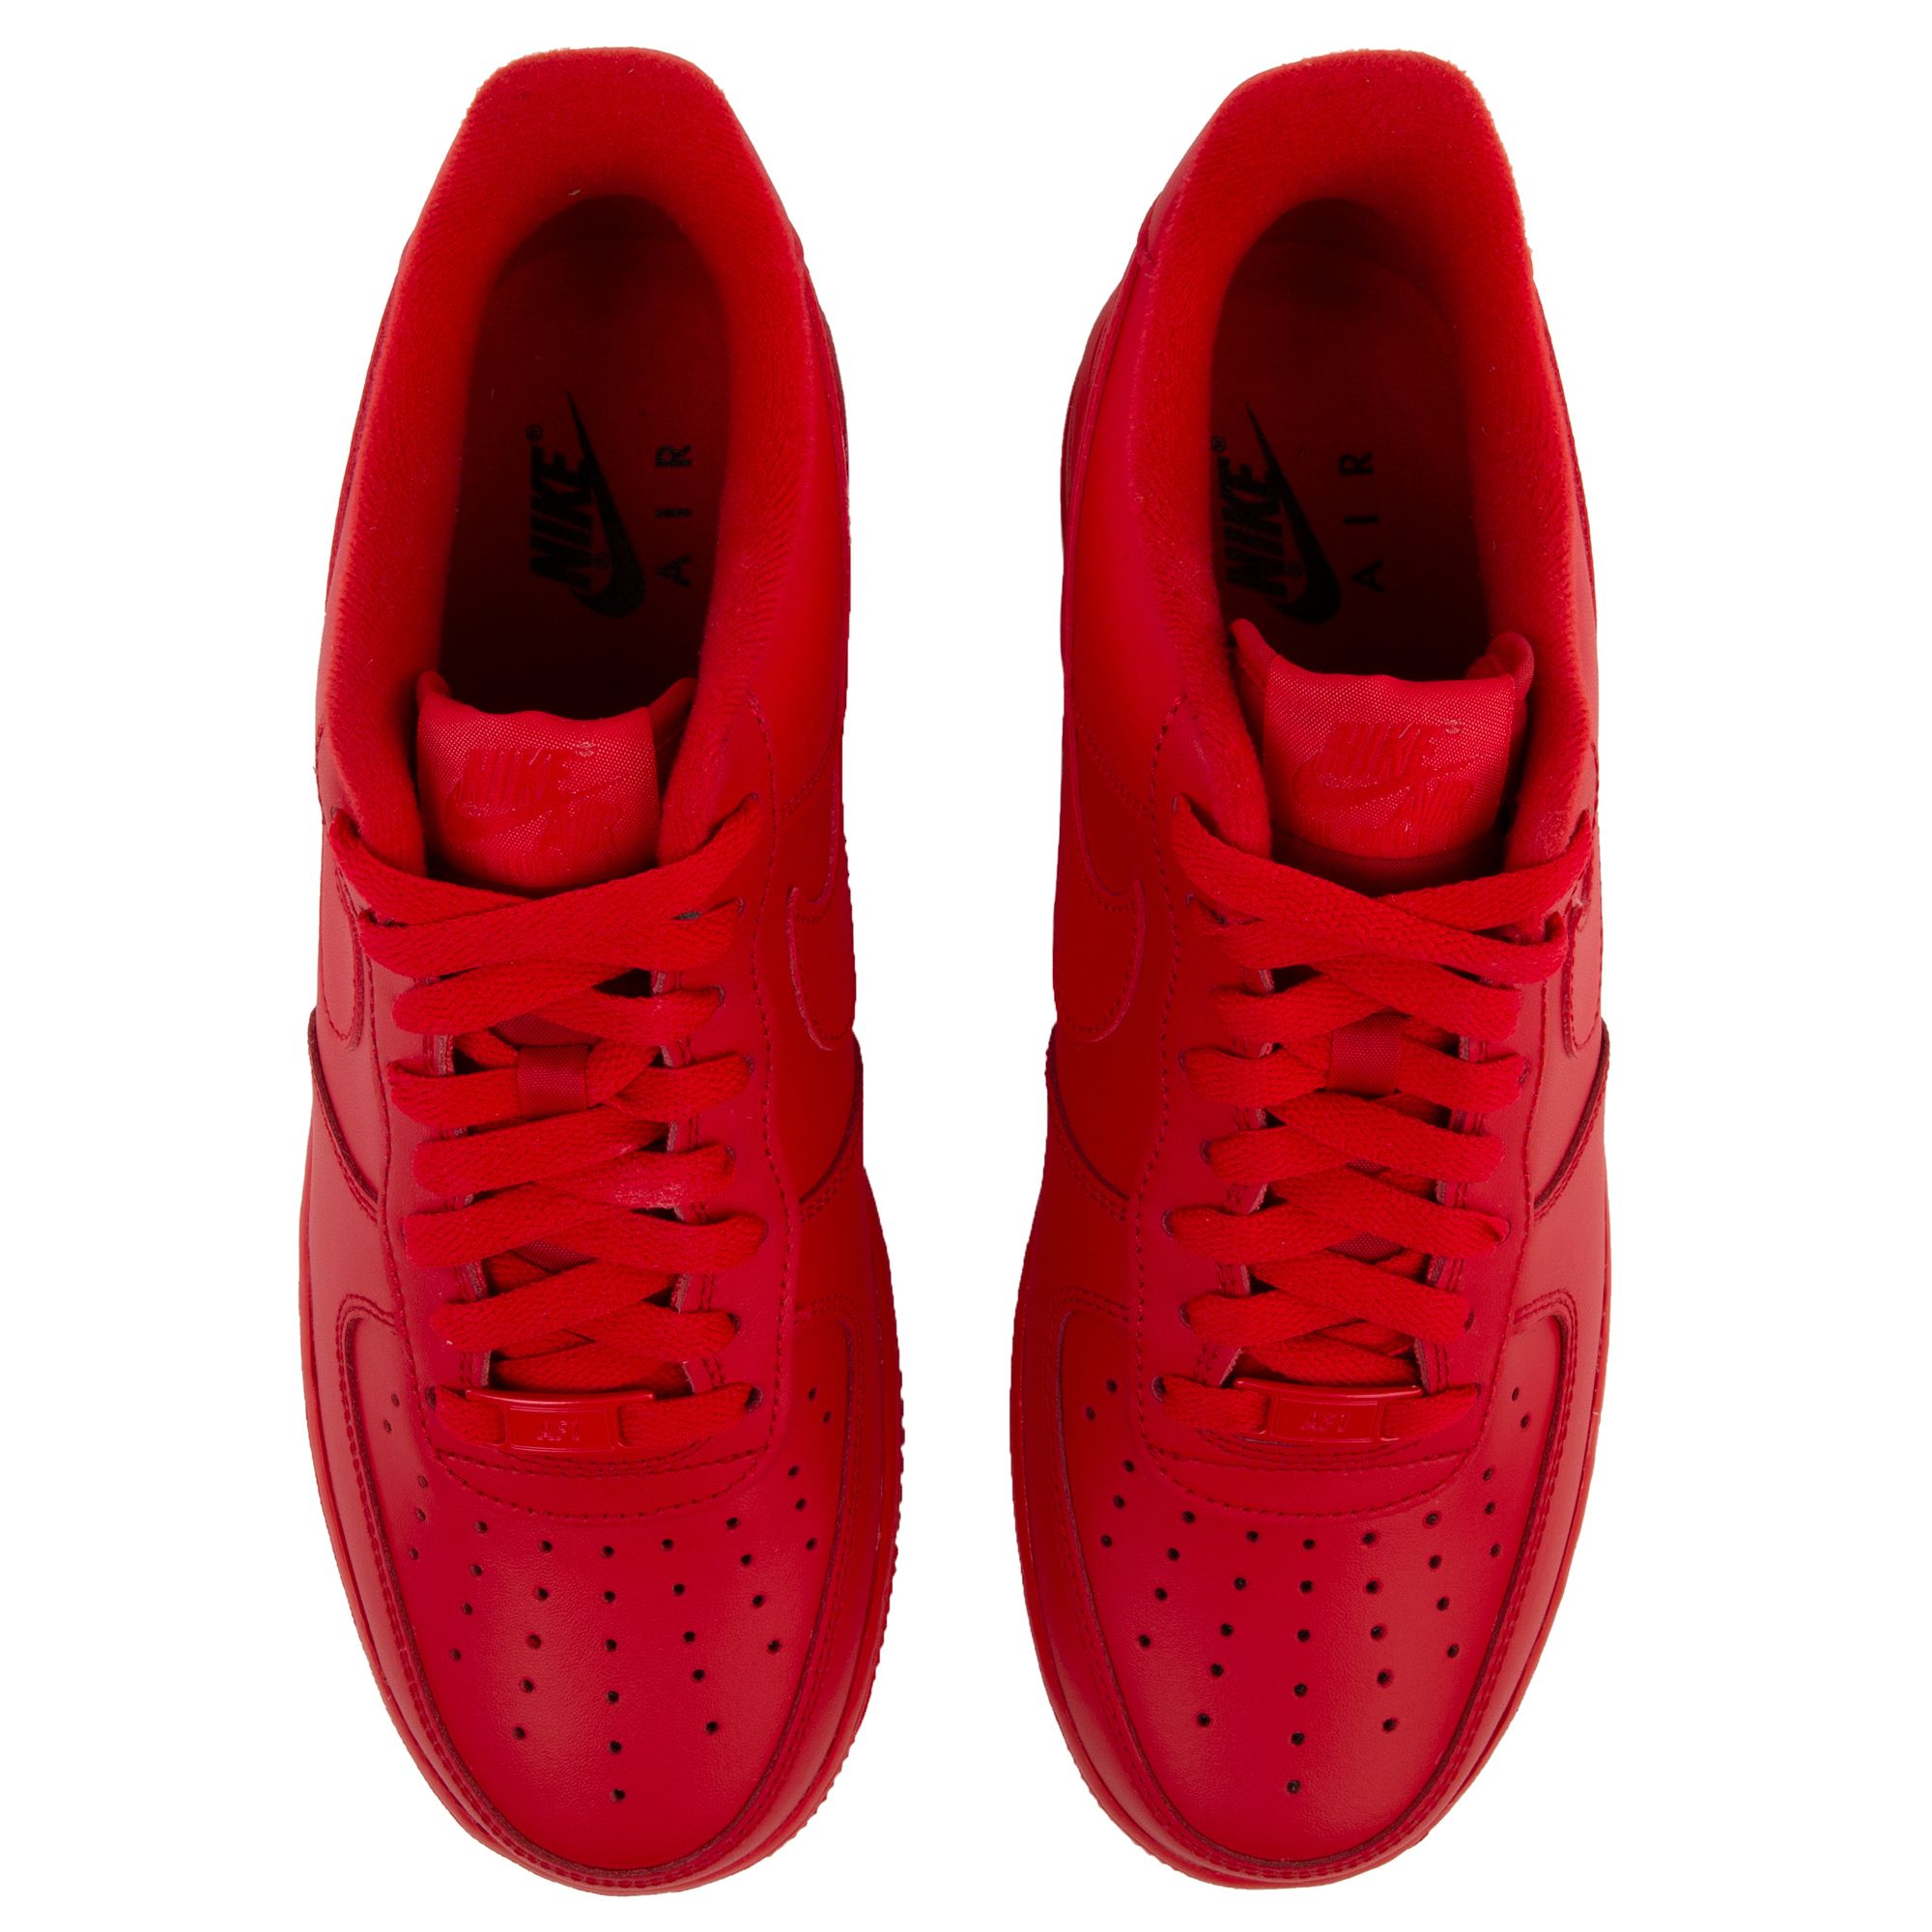 Nike Air Force 1 07 LV8 Mens Lifestyle Shoe Red CW6999-600 – Shoe Palace